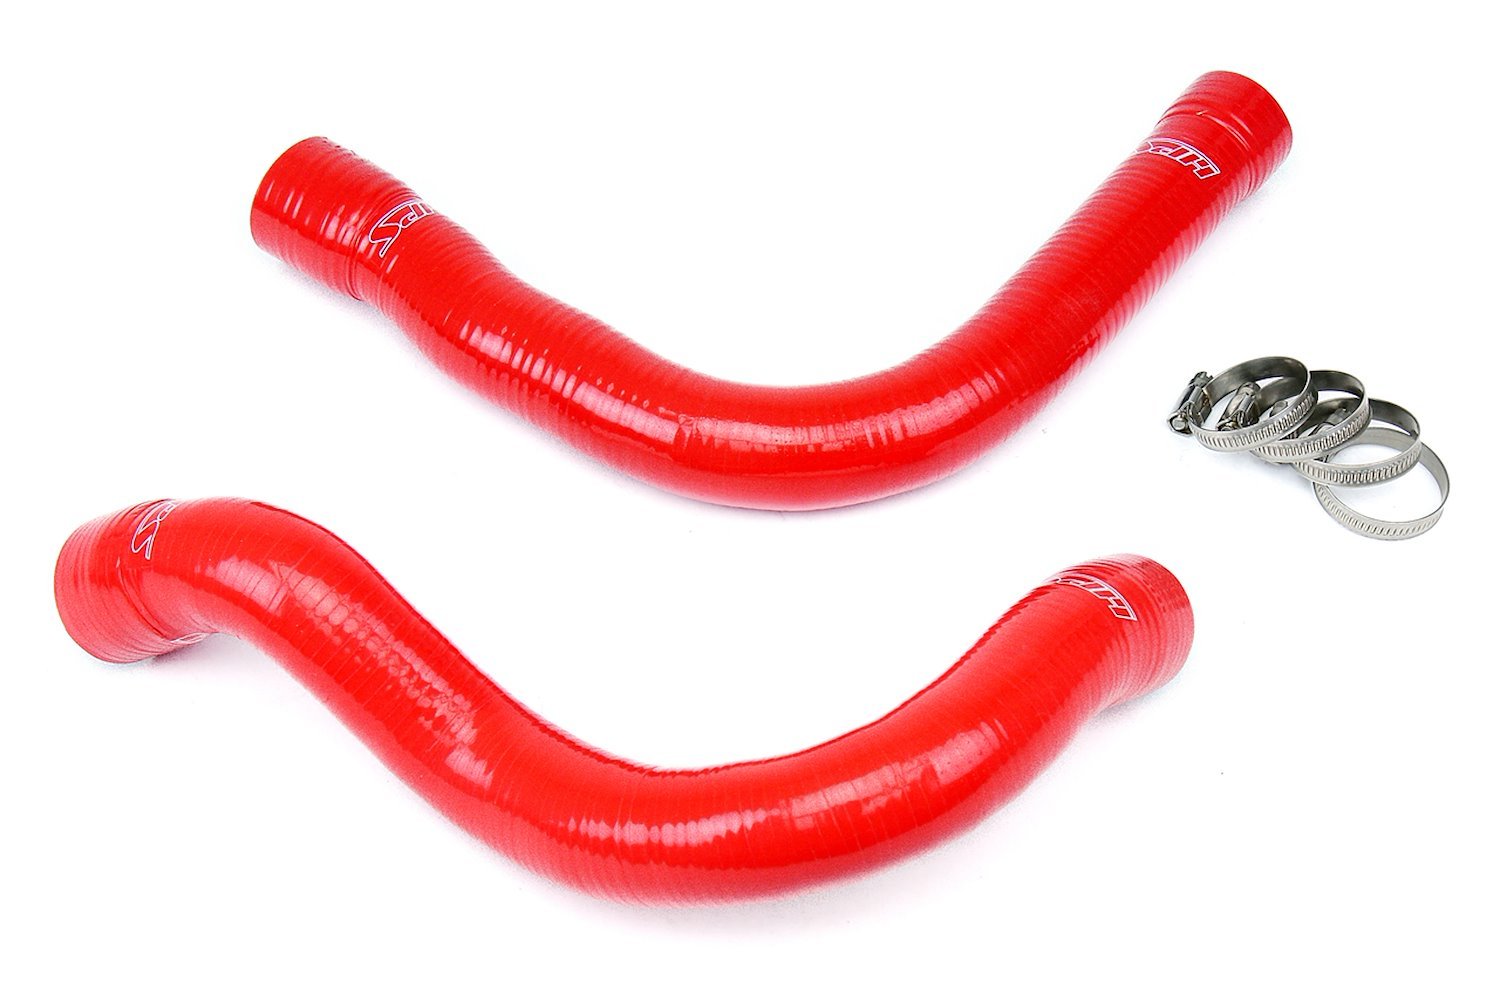 57-1007-RED Radiator Hose Kit, High-Temp 3-Ply Reinforced Silicone, Replace OEM Rubber Radiator Coolant Hoses